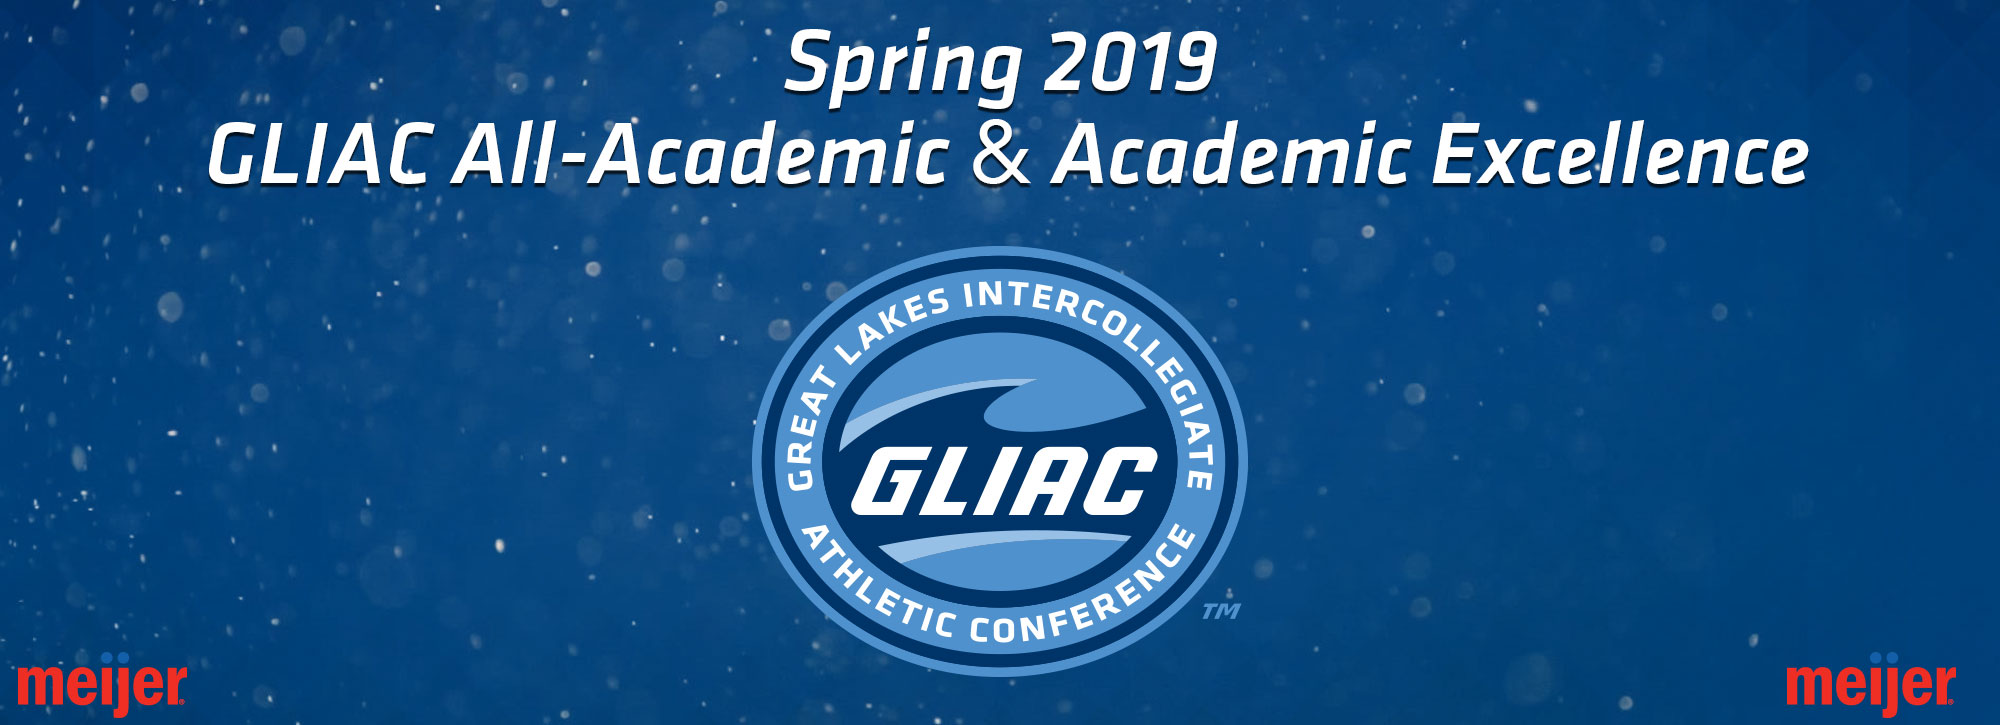 GLIAC lauds 814 Spring 2019 All-Academic & Academic Excellence Honorees